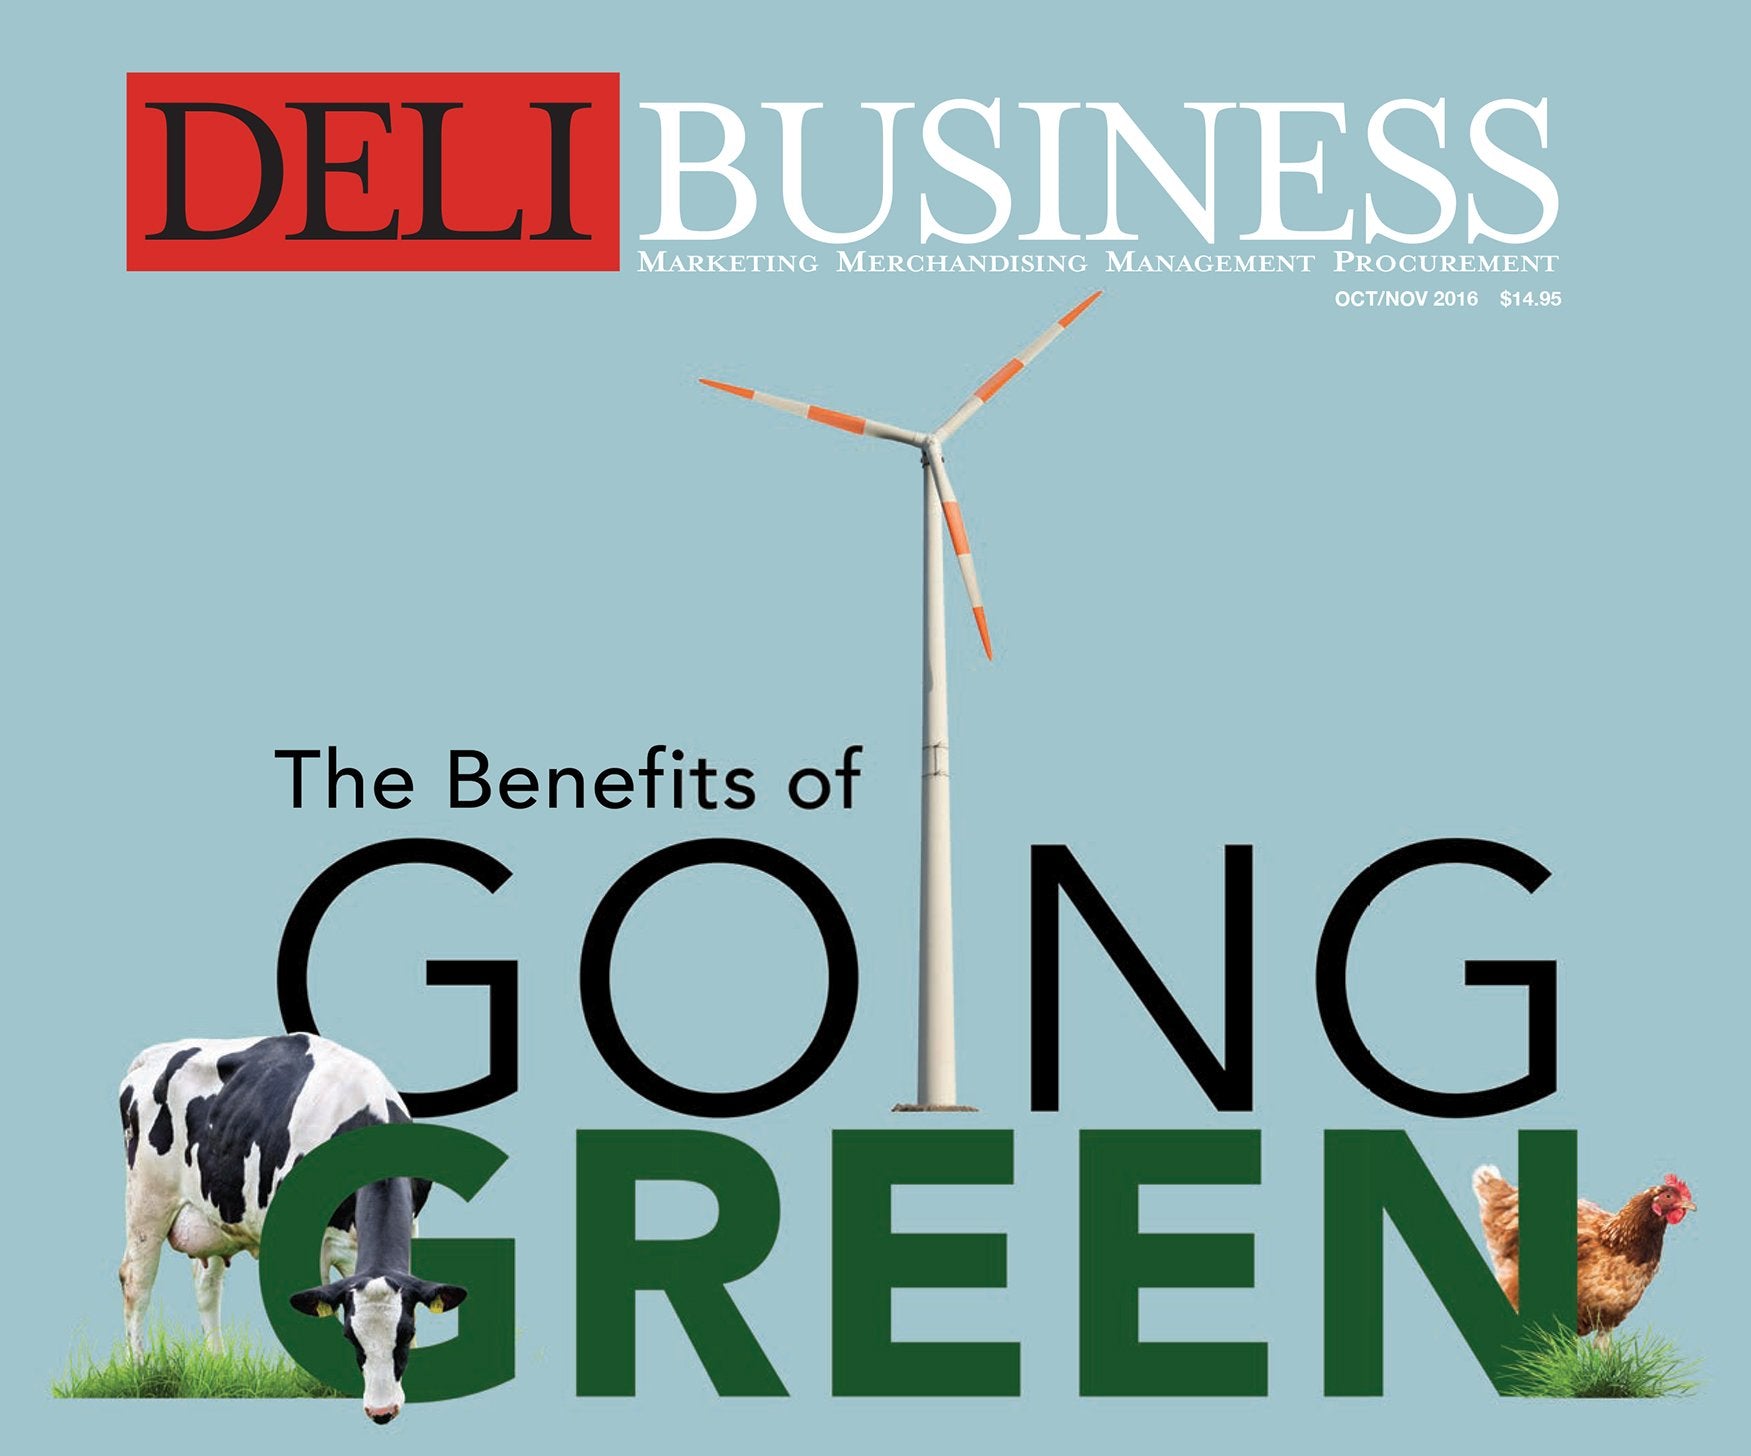 The Benefits of Going Green